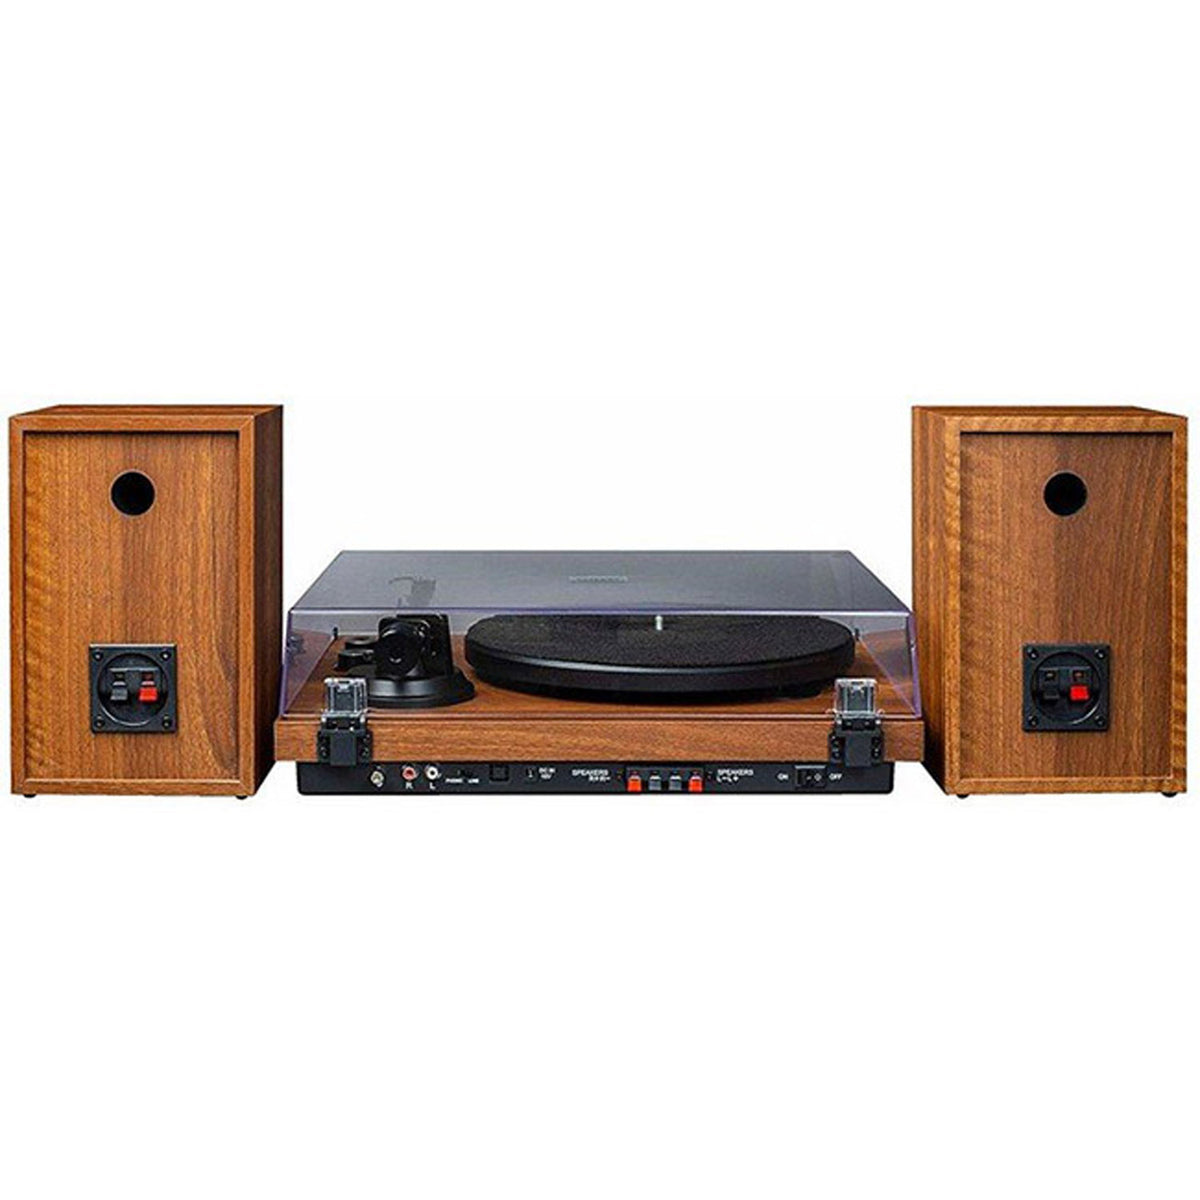 C62 Turntable with Built-In Receiver And Stereo Speakers - Walnut